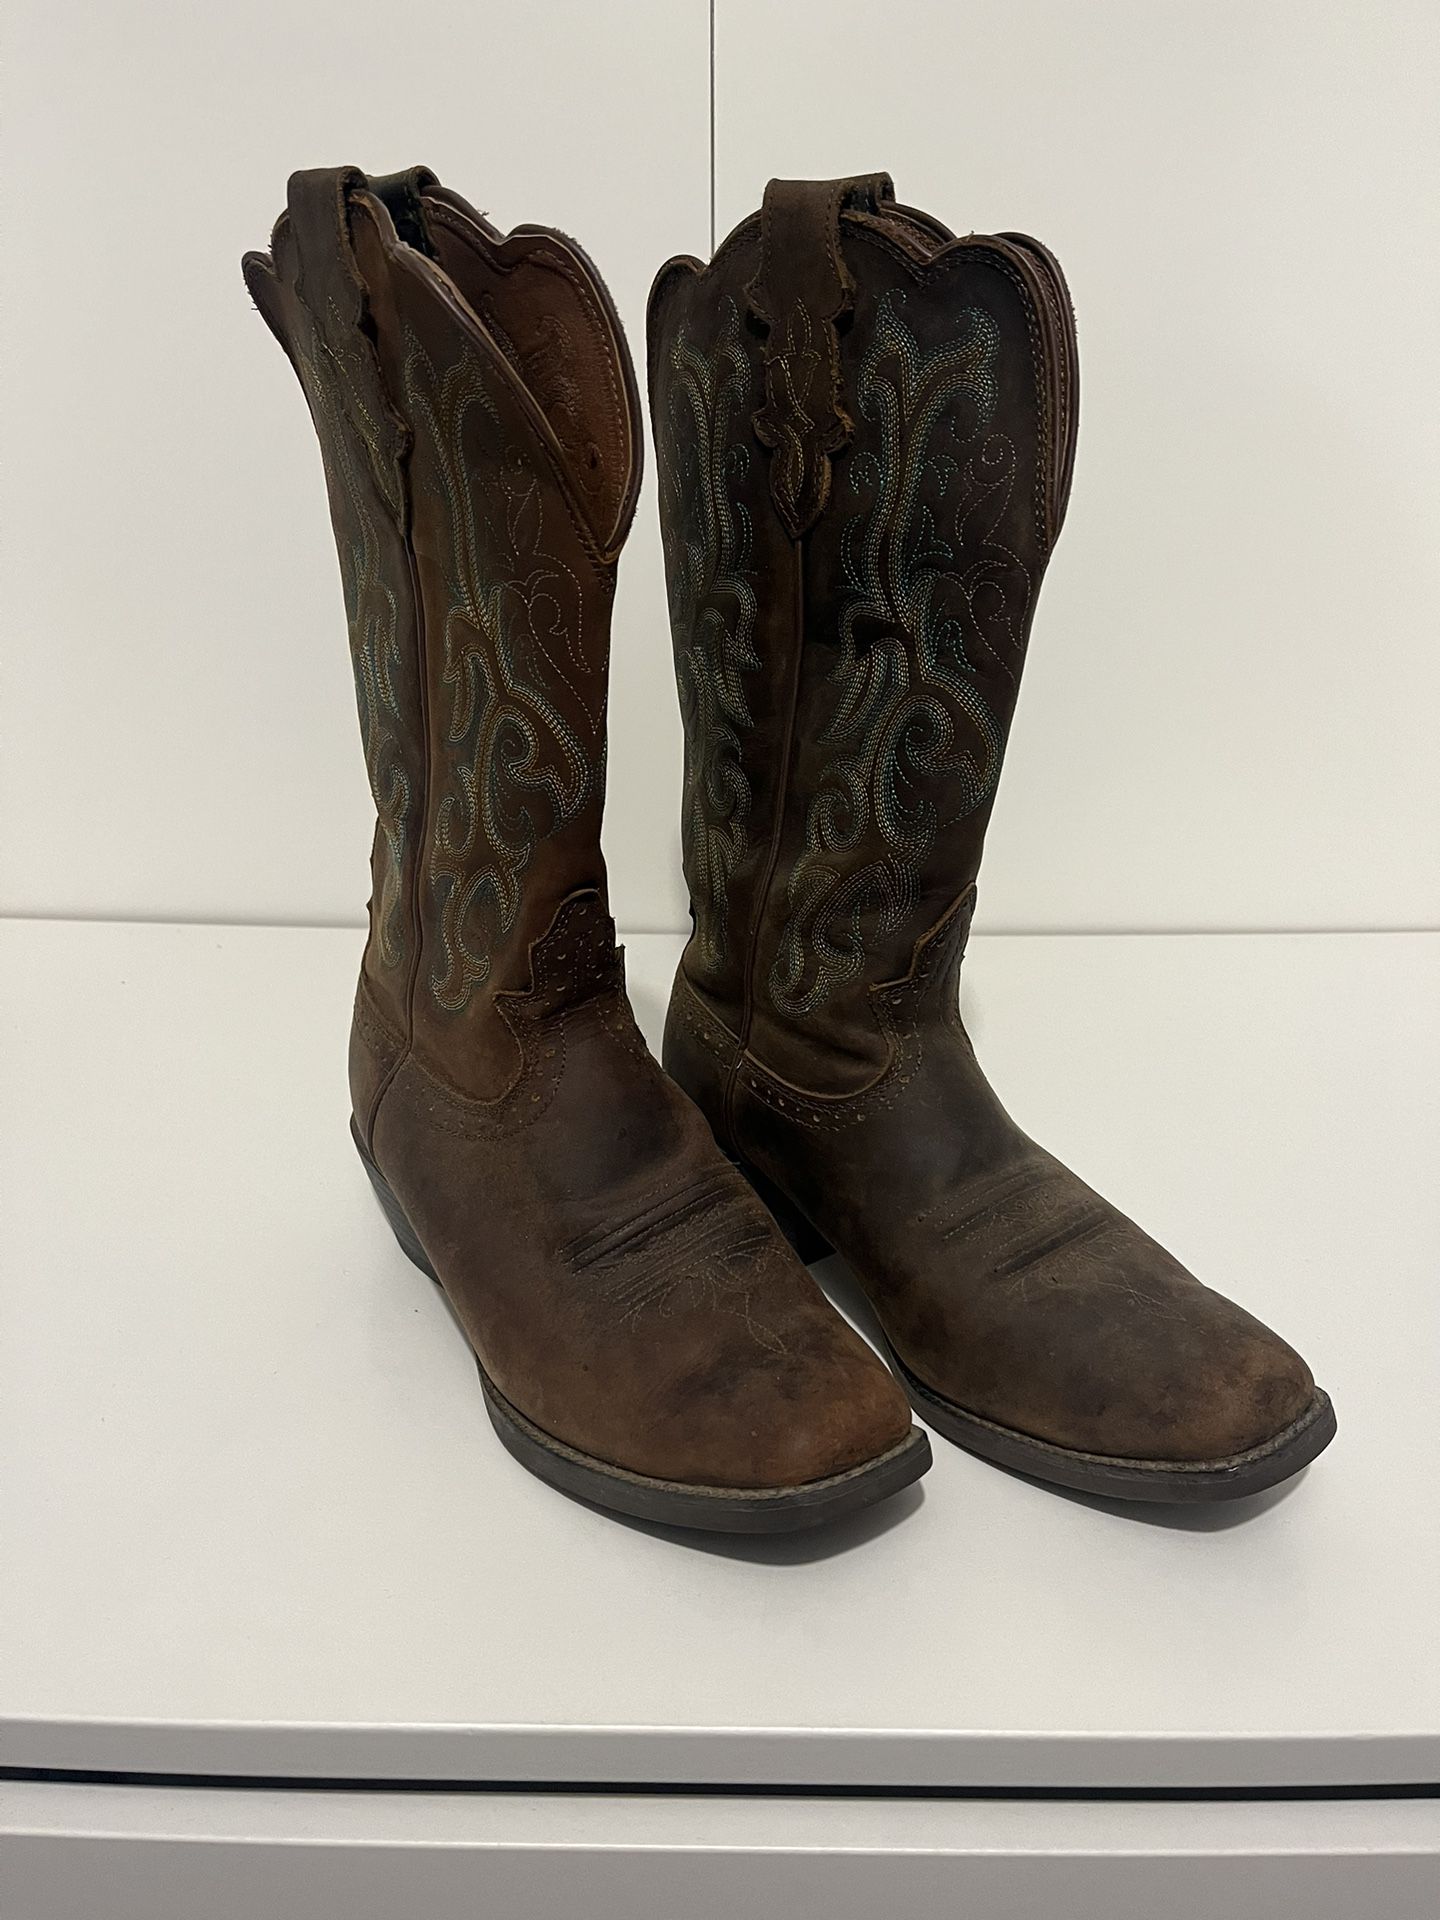 Women’s Justin Leather Western Cowboy Boots Size 9